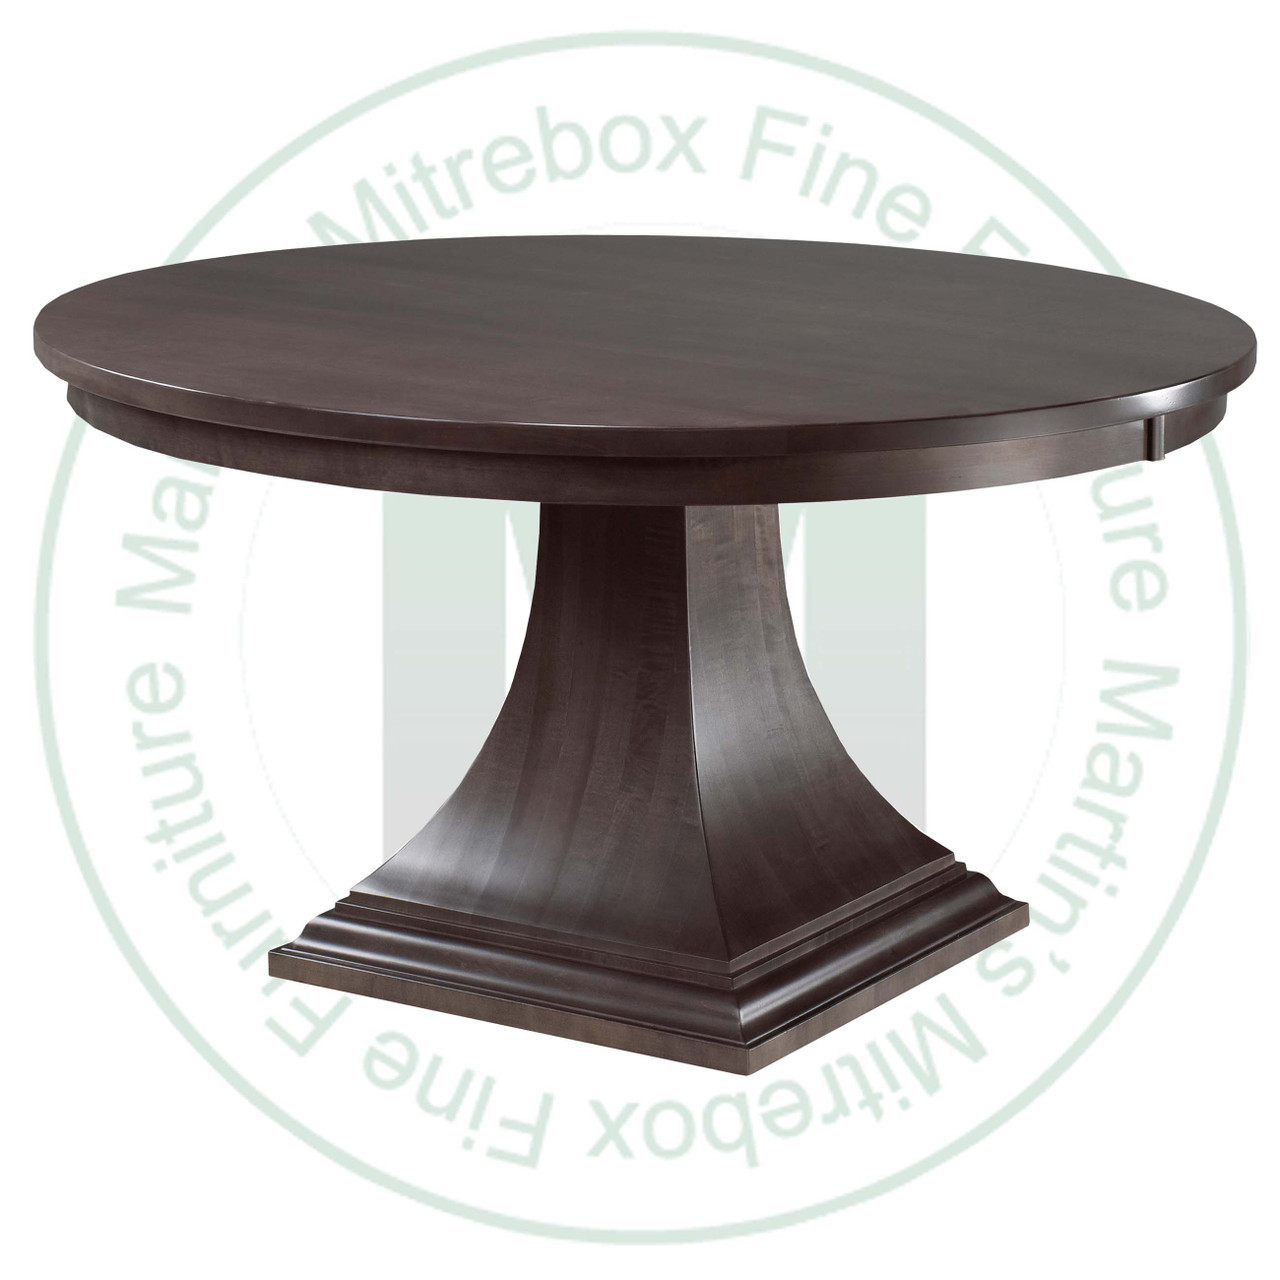 Wormy Maple Key West Single Pedestal Table 60''D x 60''W x 30''H With 1 - 12'' Leaf Table Table Has 1'' Thick Top